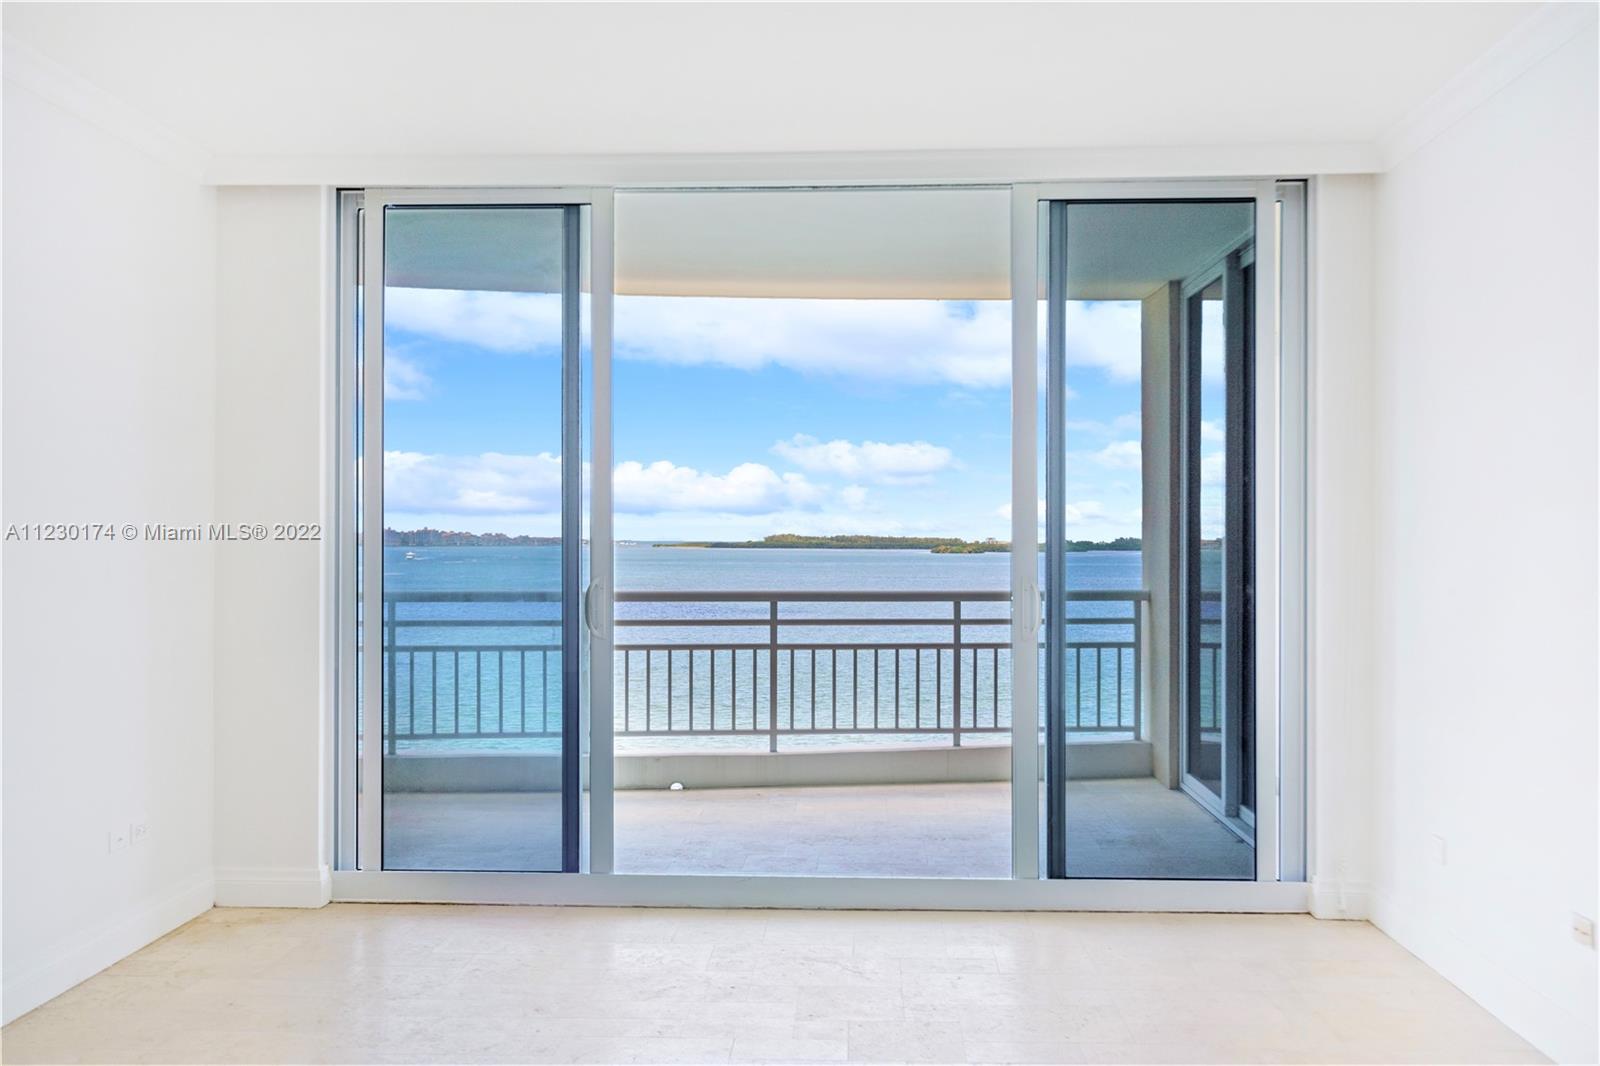 VERY RARE 1700 sq/ft Two Tequesta Point 2 Bed / 2.5 Bath (only 1 on market) w/ stunning direct bay views. LOWEST PRICE PER SQ/FT AT TWO TEQUESTA. 1 Extra PARKING space is negotiable. Freshly painted, marble floor professionally cleaned, Storage Locker, upgraded built-in Stainless Steel Fridge, built-out closets, a huge master bedroom w/ direct access to the Balcony, a master bathroom w/ Kohler fixtures, a double vanity, a large jacuzzi tub, & separate marble walk-in shower. The second bedroom has direct bay views, an ensuite bathroom, & walk-in closet. Two Tequesta is a luxury condo w/ a state of the art fitness center (w/ racquetball, b-ball, cross-fit, massage & aerobics areas), an updated lobby, BBQ's, a playroom, tennis, 2 conference rooms, free valet, 24/7 security, & a new clubroom.